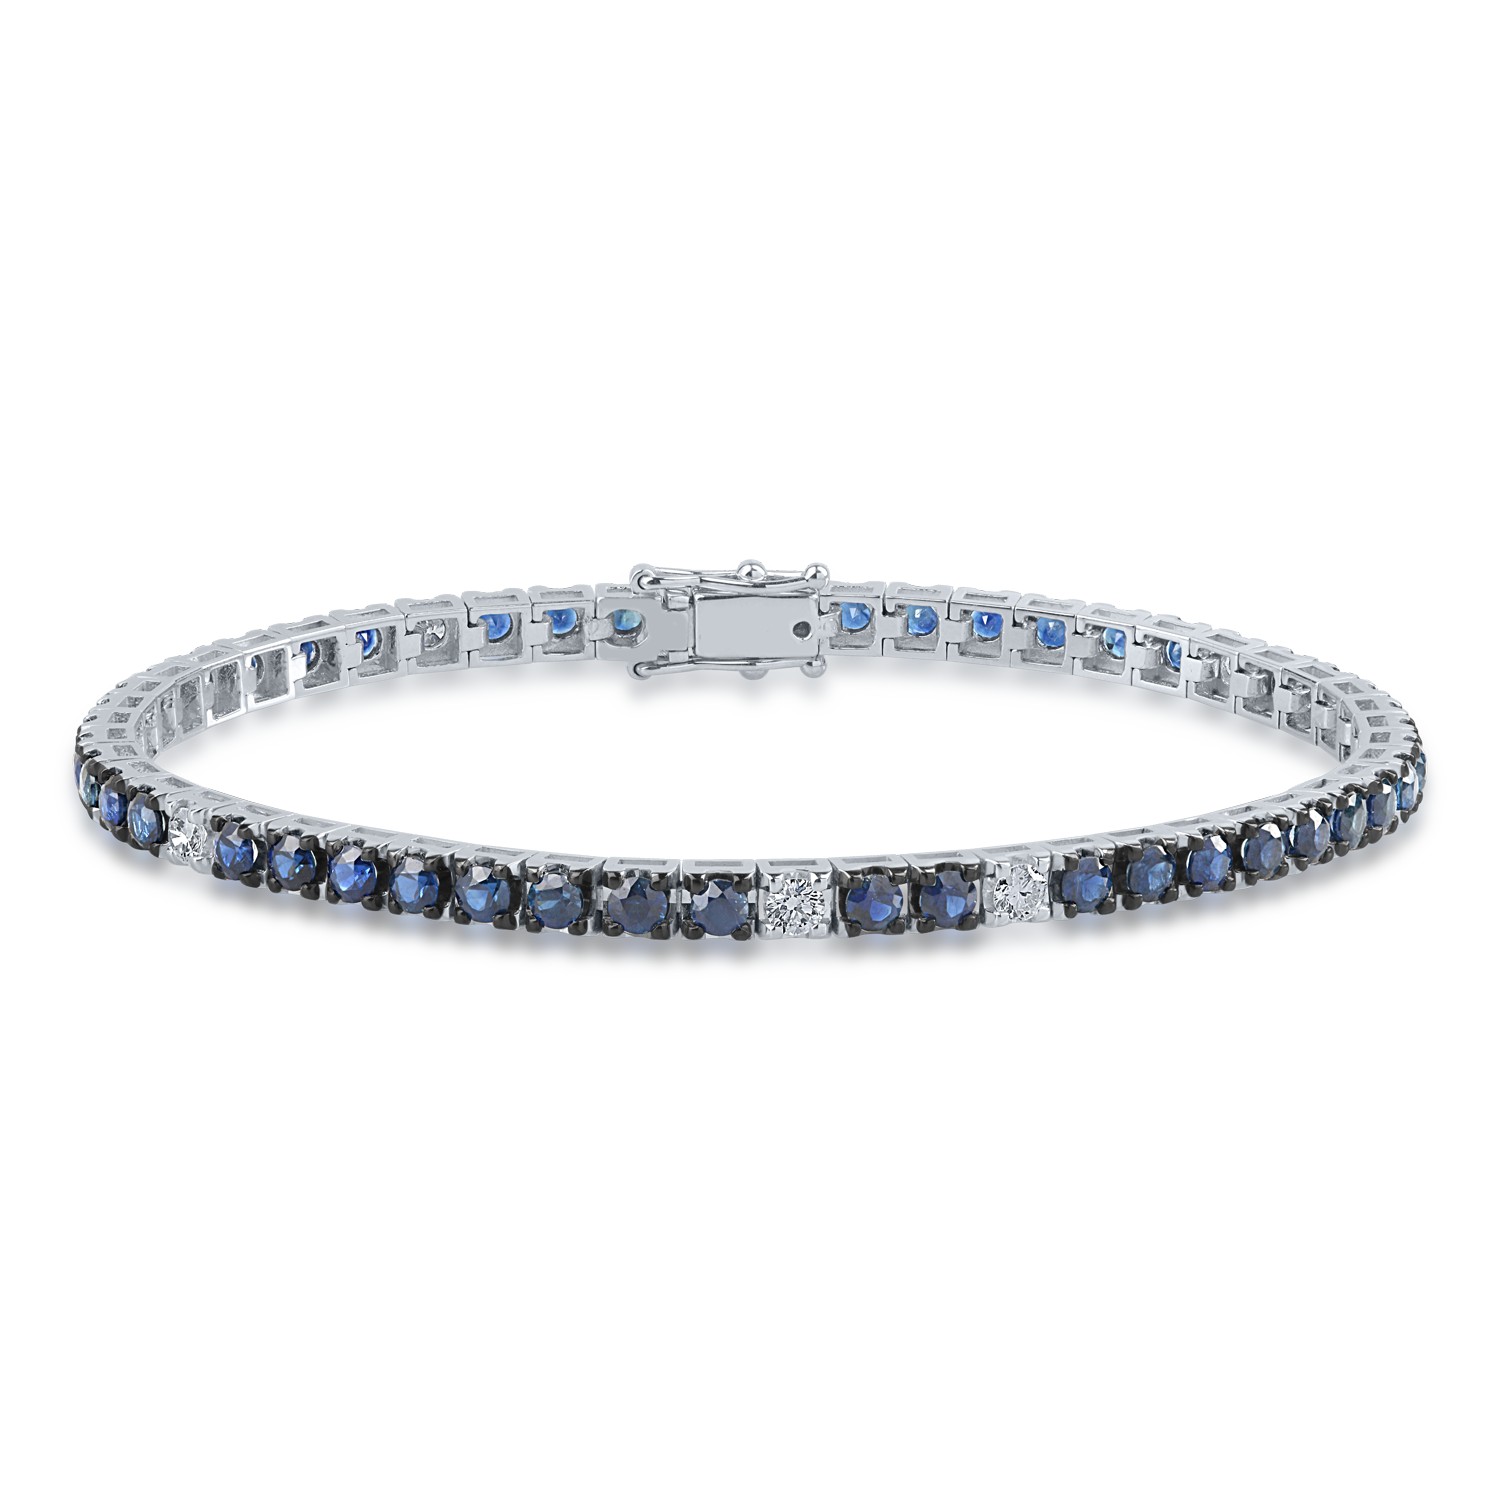 White gold tennis bracelet with 4.2ct sapphires and 0.35ct diamonds